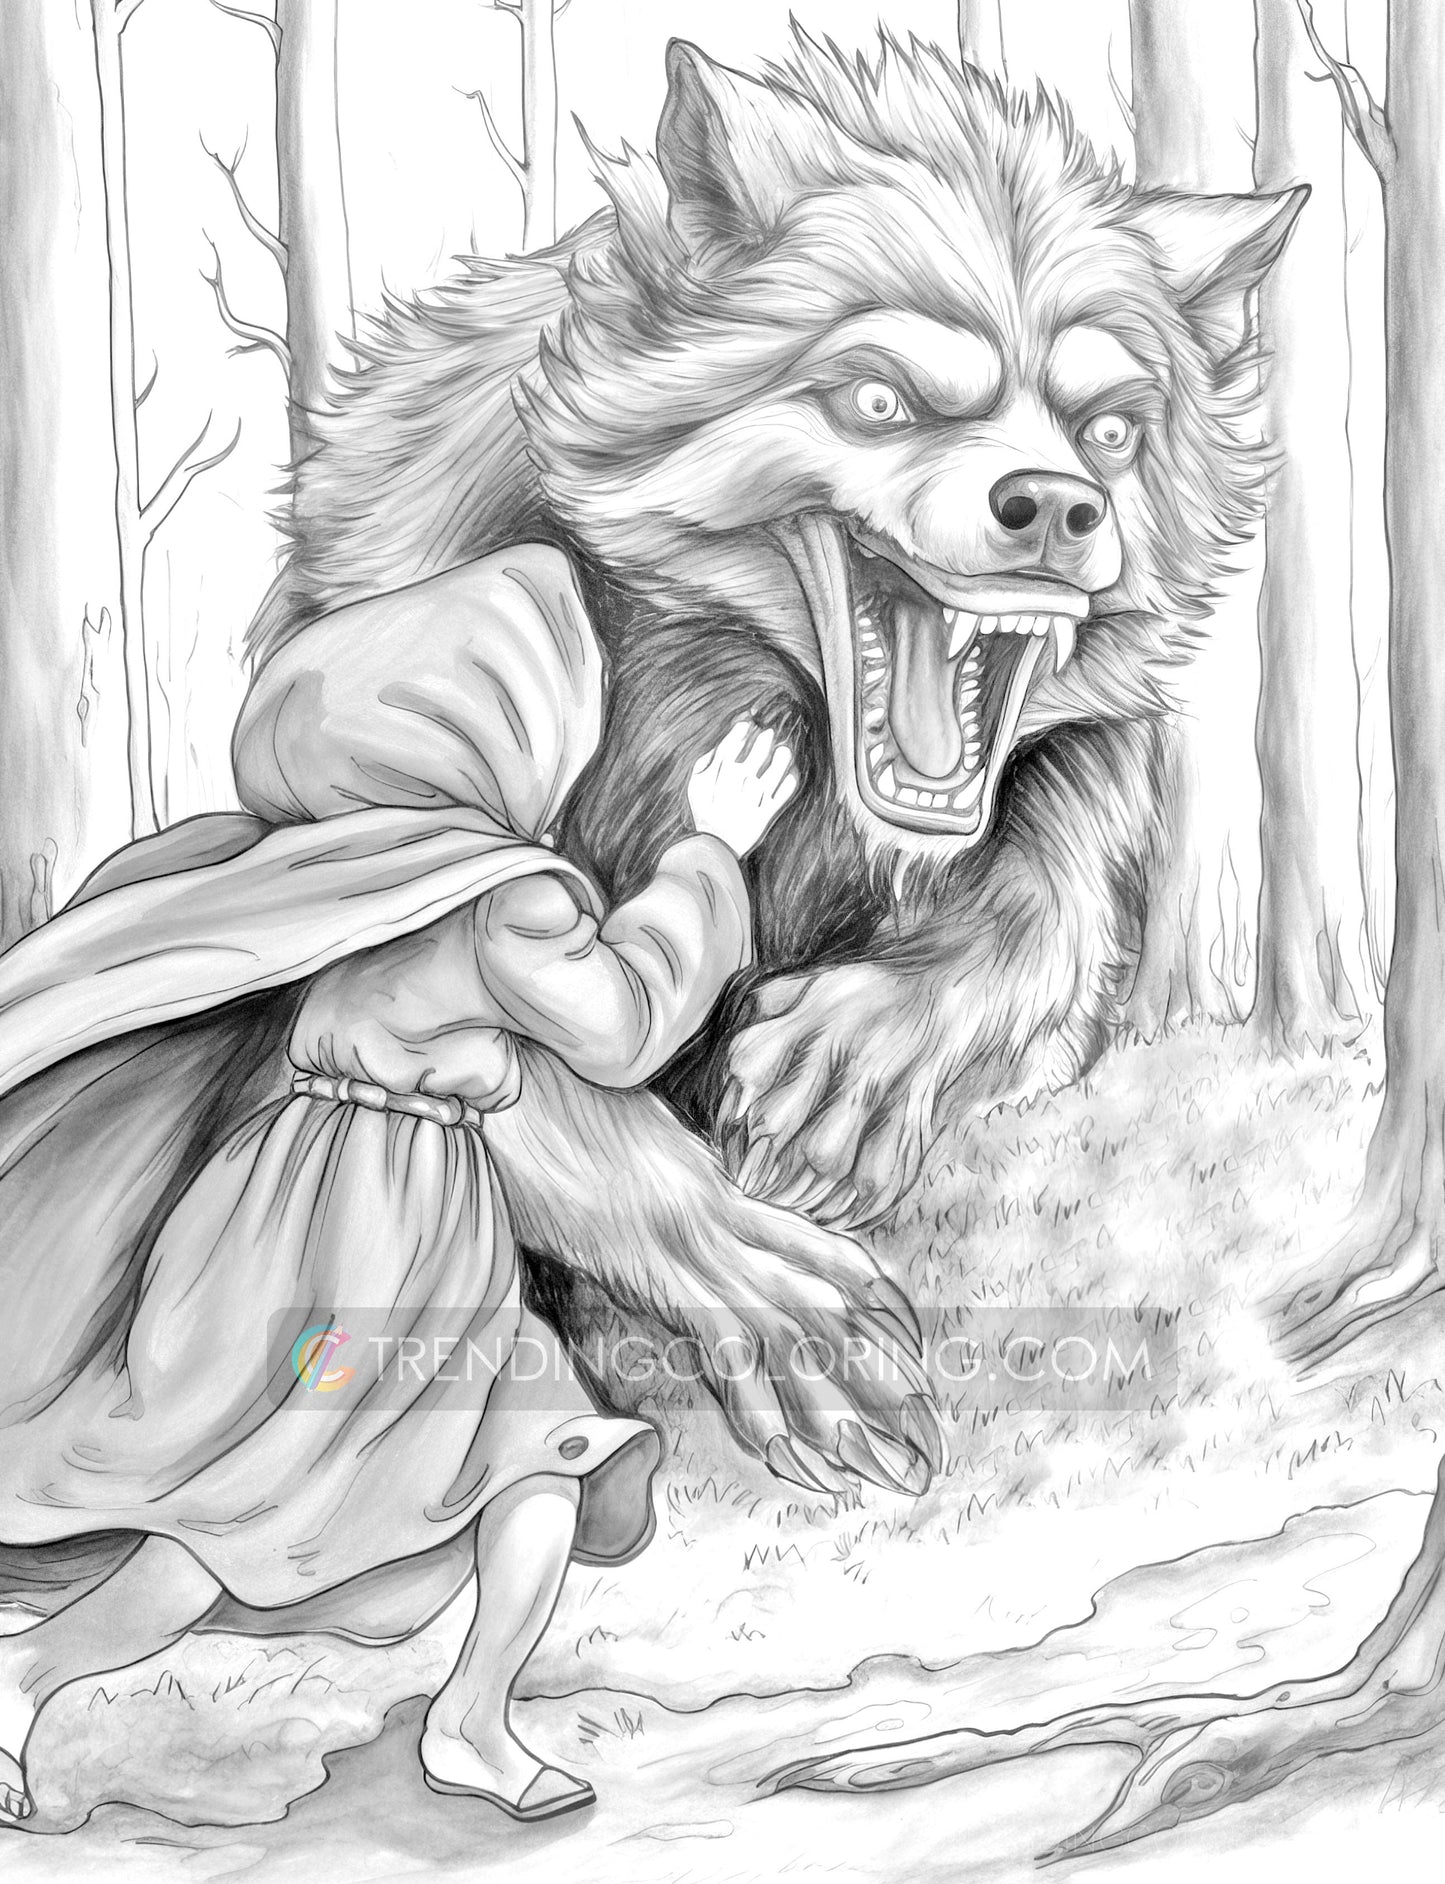 25 Red Riding Hood's Journey Grayscale Coloring Pages - Instant Download - Printable PDF Dark/Light